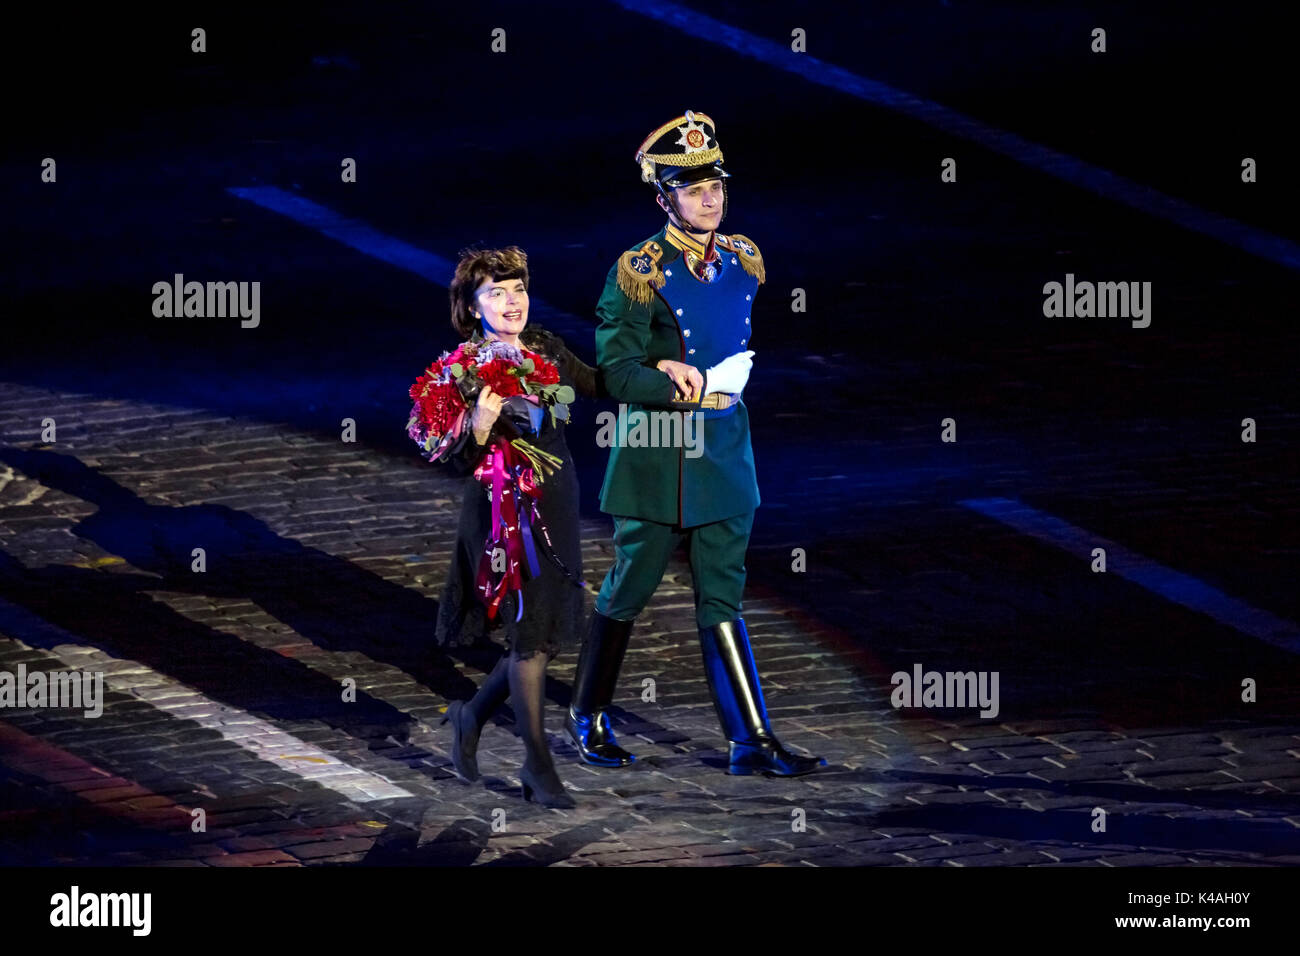 Moscow, Russia - August, 2017: Performance of french singer Mireille Mathieu on International Military Tattoo Music Festival 'Spasskaya Tower' in Mosc Stock Photo